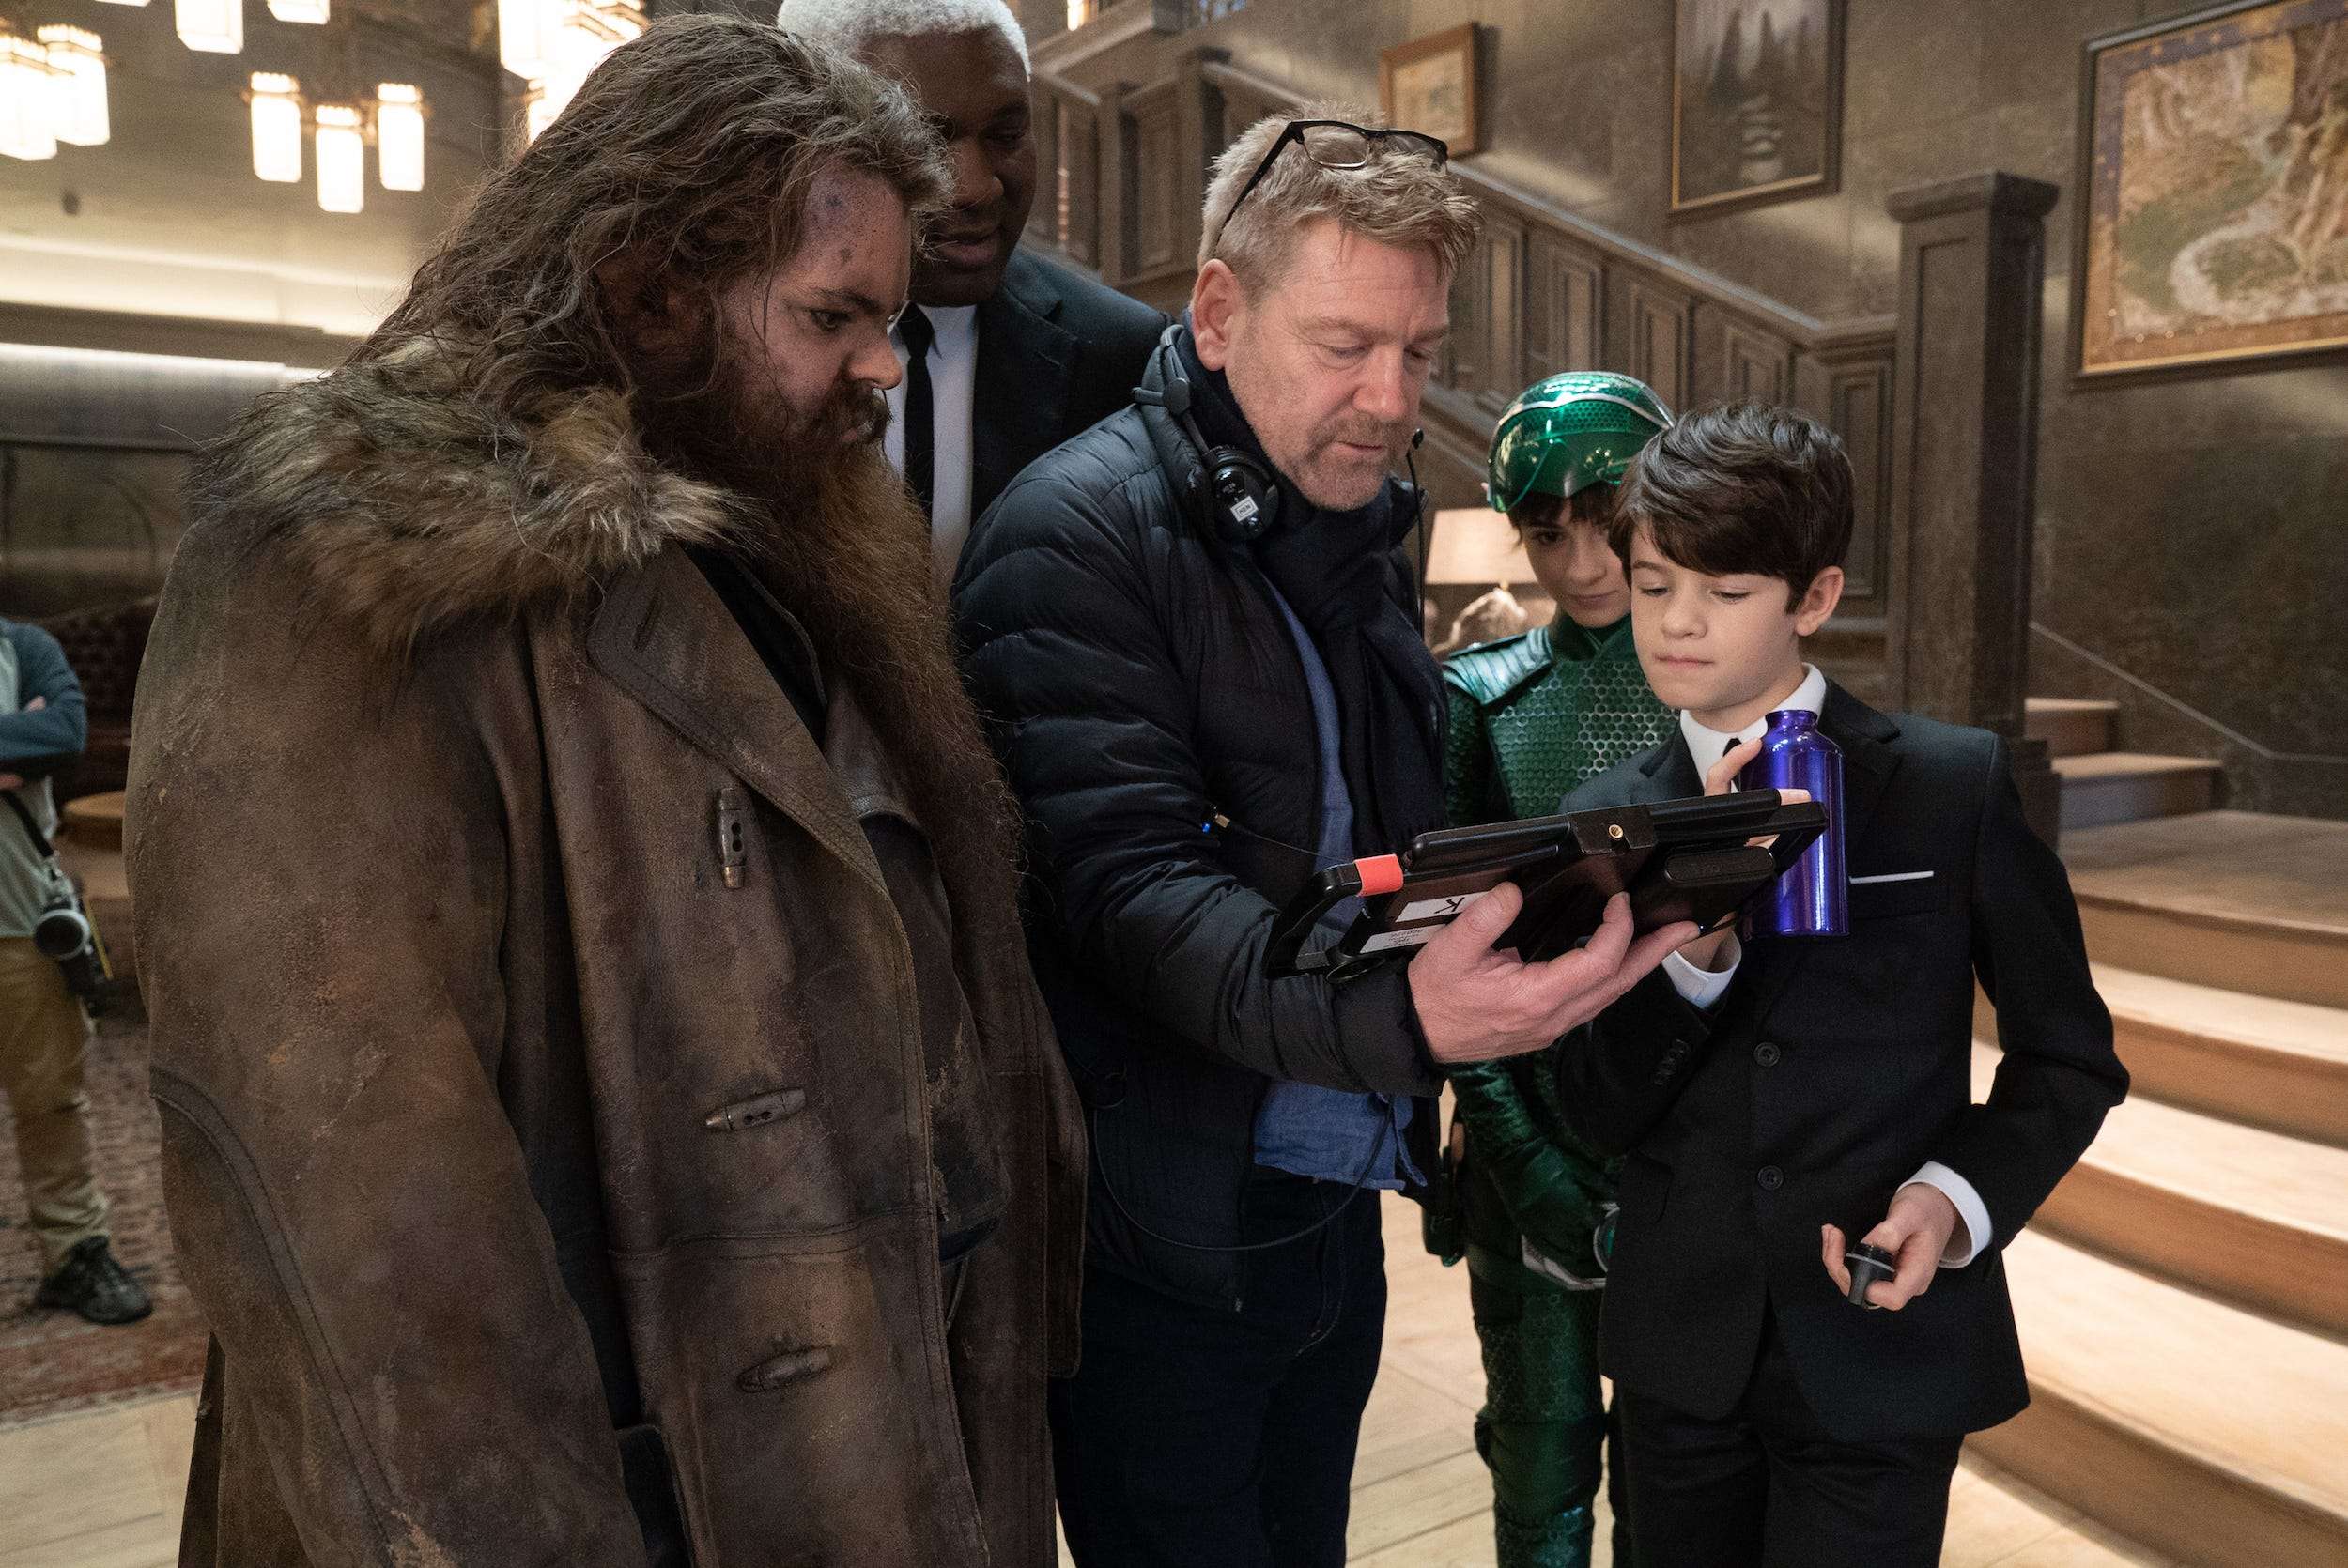 A behind-the-scenes photo shows director Kenneth Branagh with Josh Gad, Non...